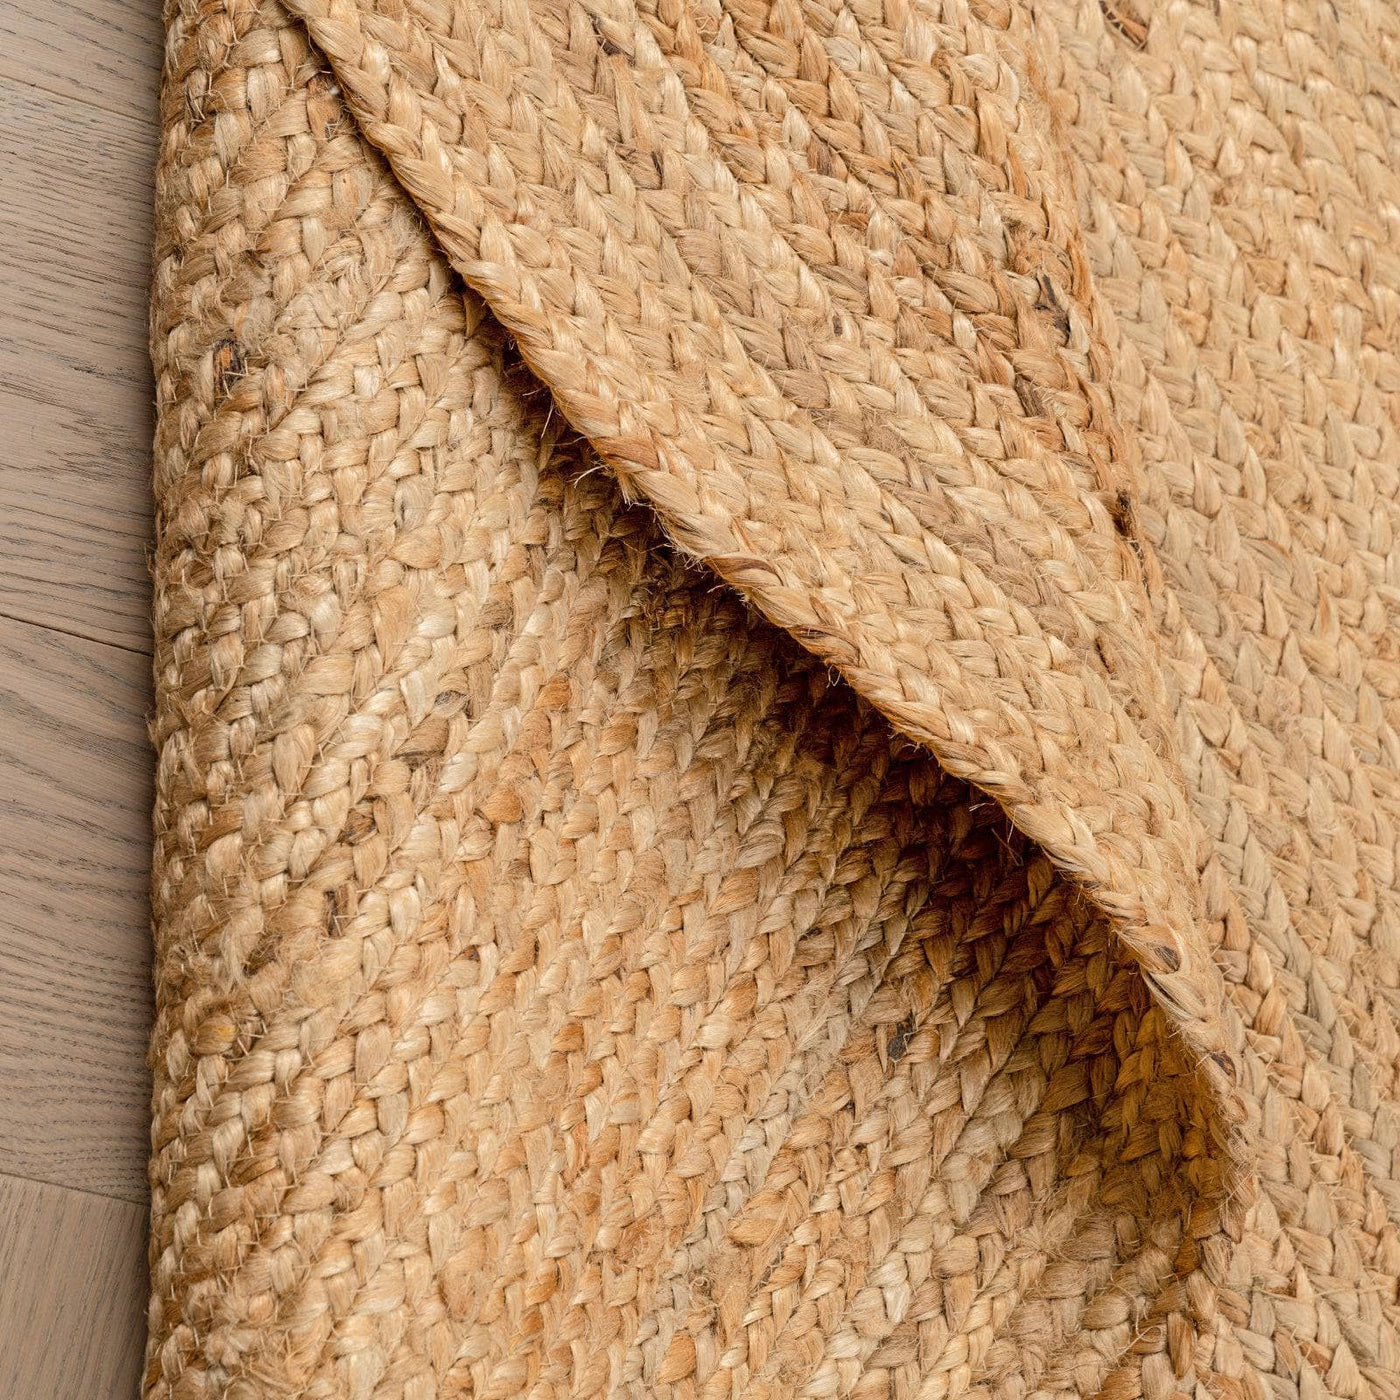 Hey Jute Round Handwoven Area Rug, Natural, 160x160 cm 4